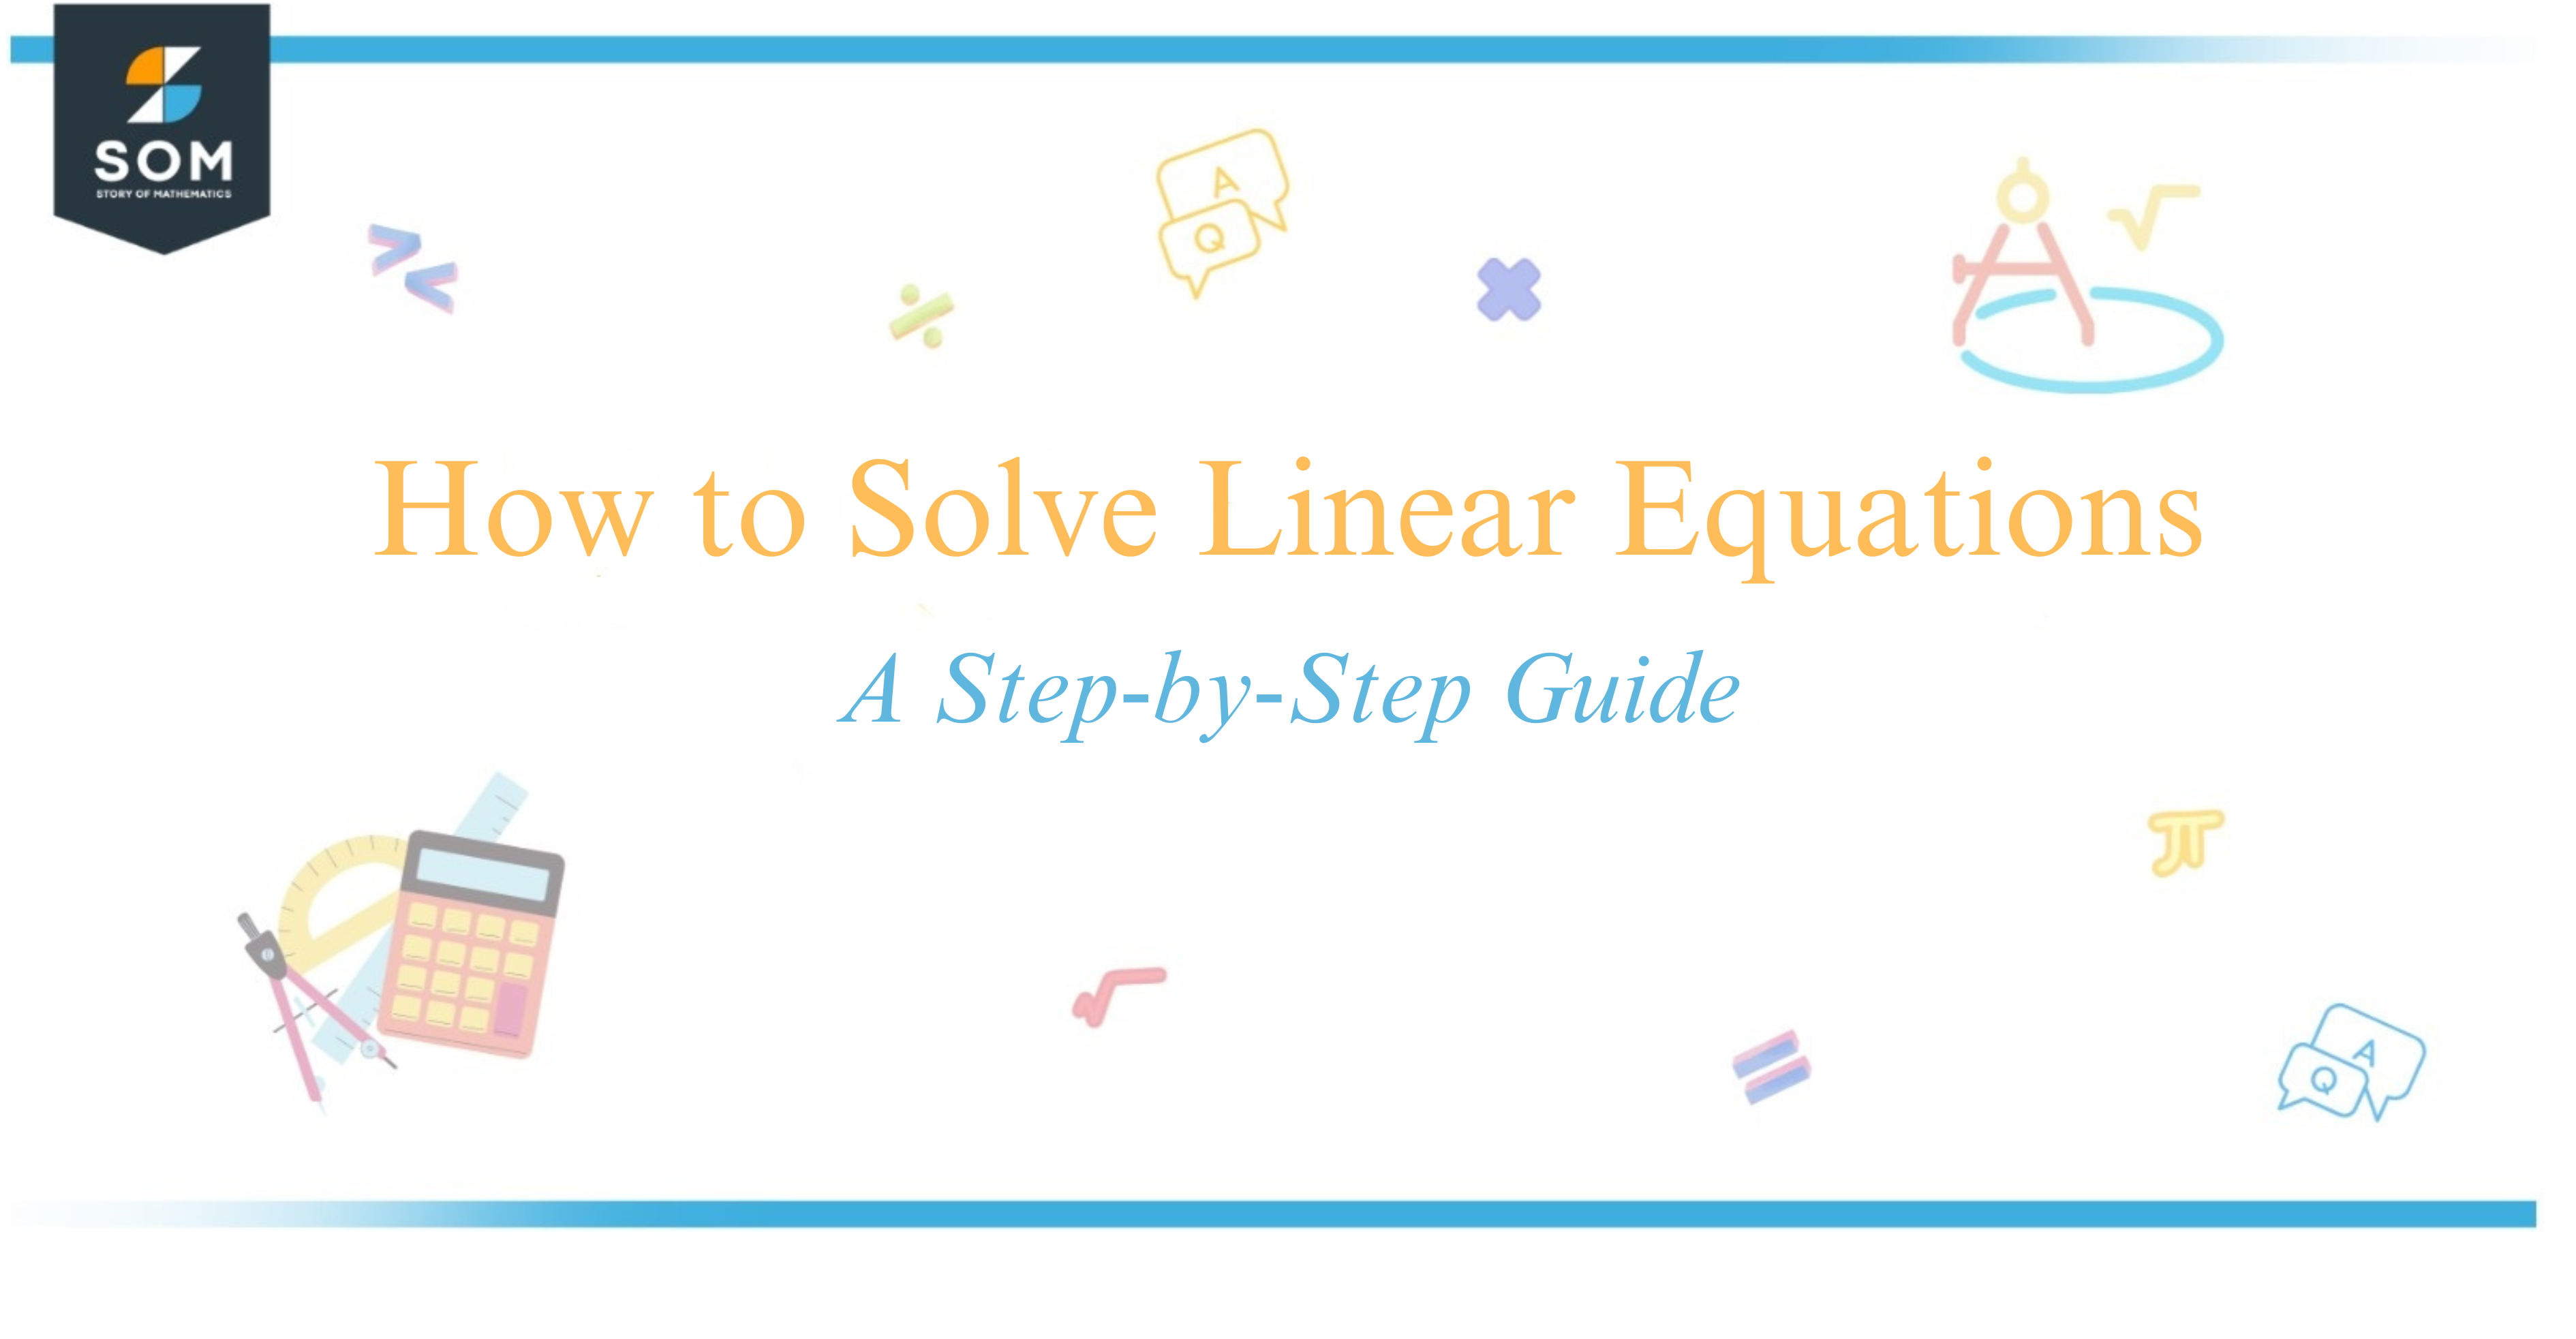 How to Solve Linear Equations A Step-by-Step Guide